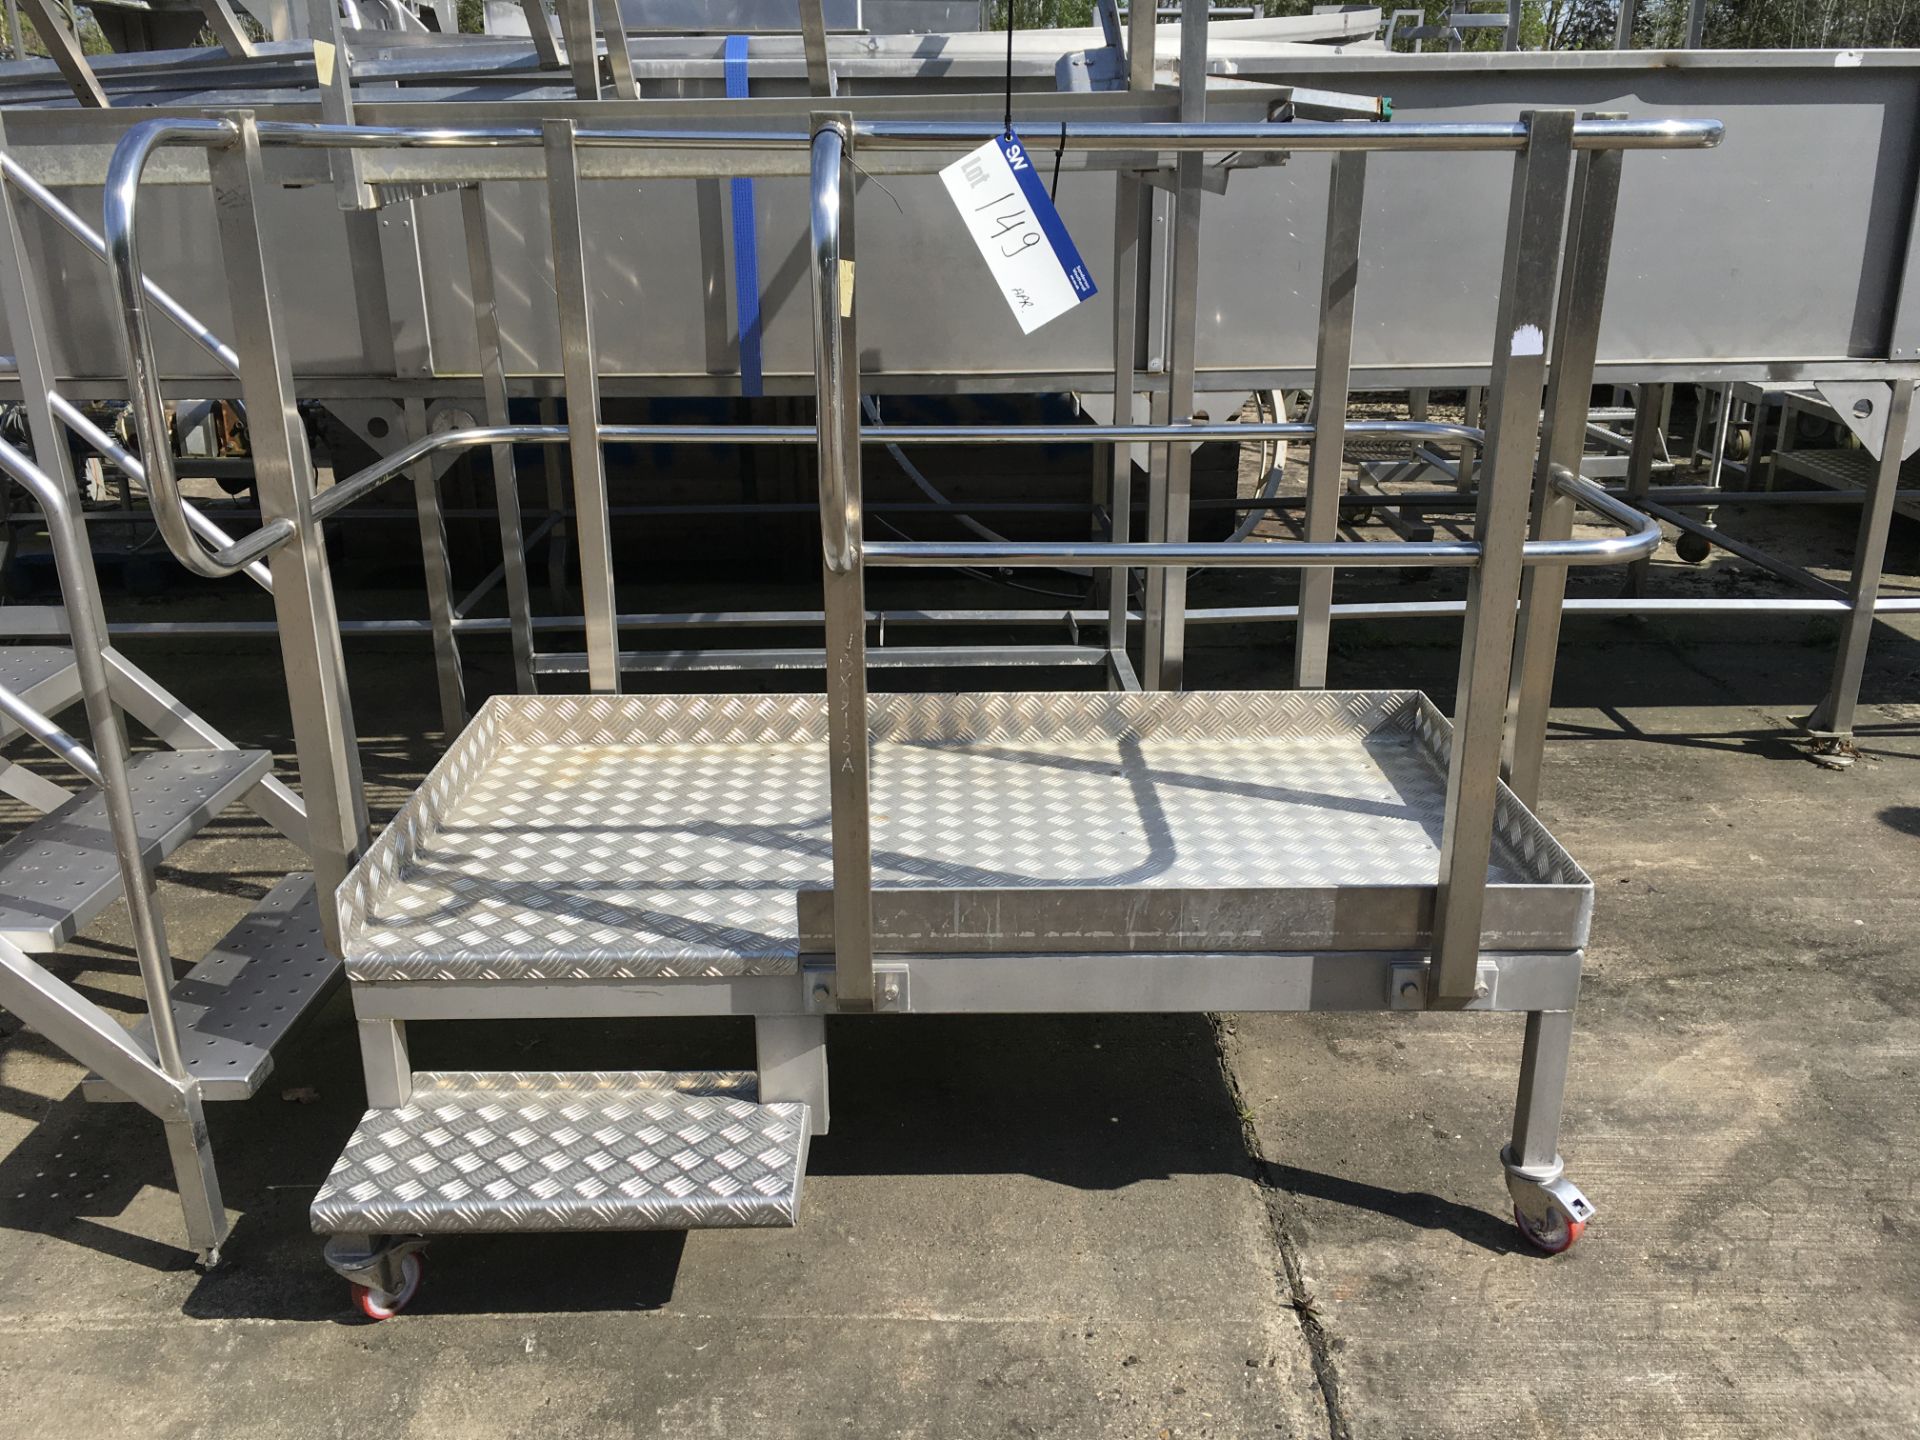 Mobile Stainless Steel Platform, approx. 1800mm long x 1200mm wide x 1650mm high, £50 lift out